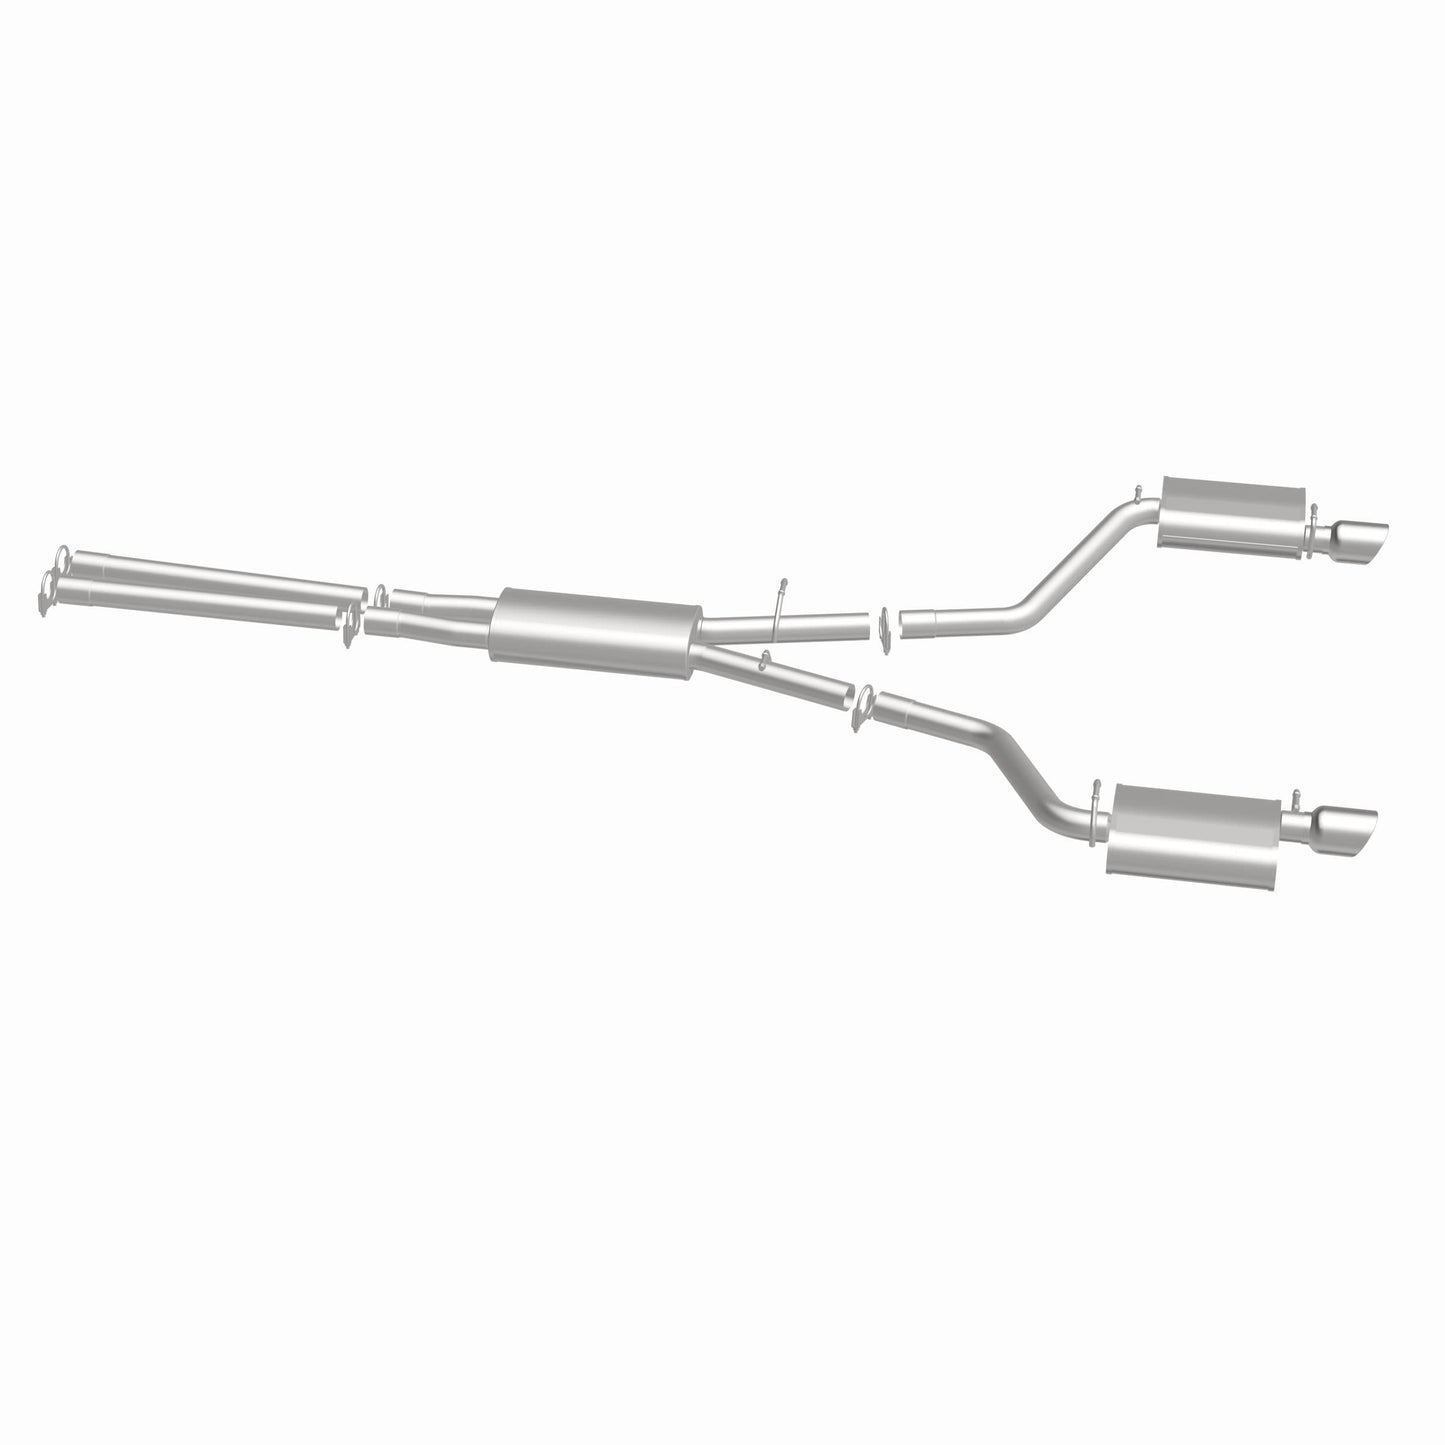 Direct-Fit Replacement Exhaust System 106-0556